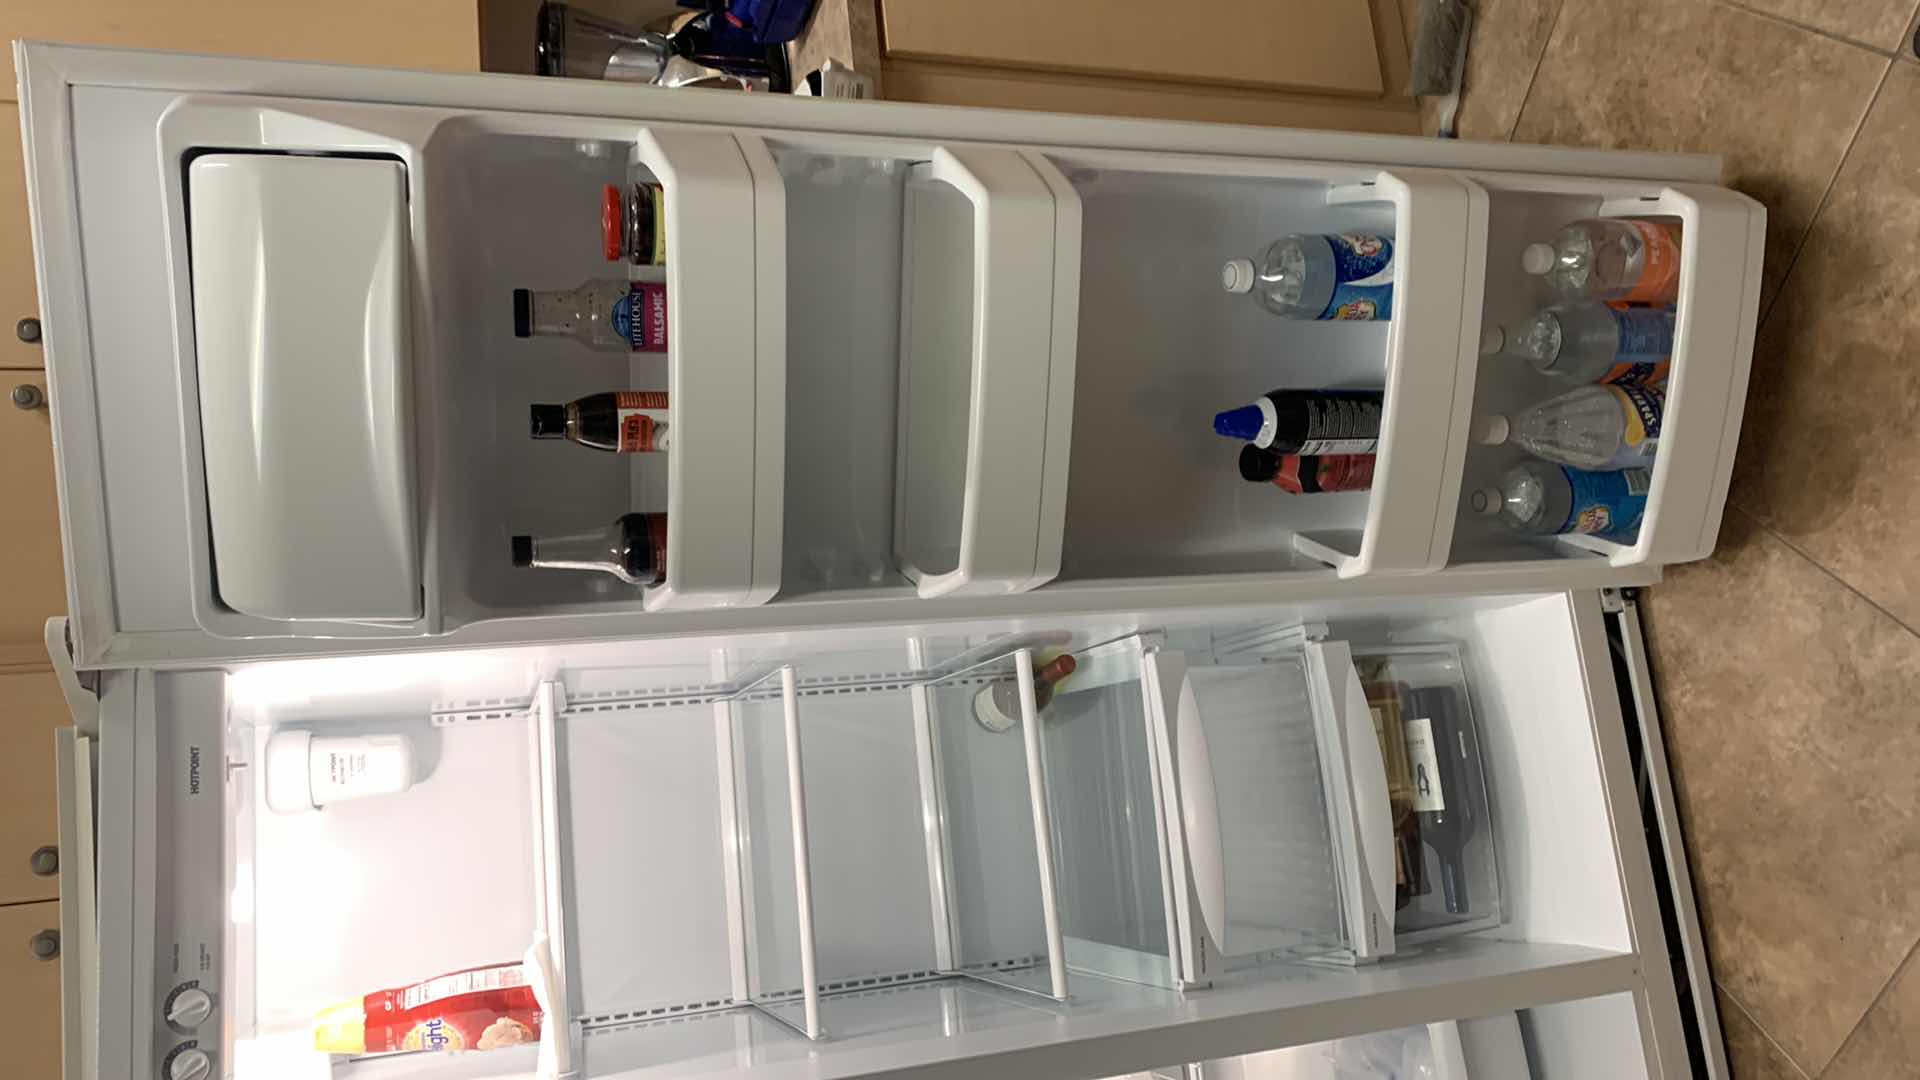 Photo 5 of HOTPOINT REFRIGERATOR WORKING, ( CONTENTS NOT INCLUDED)